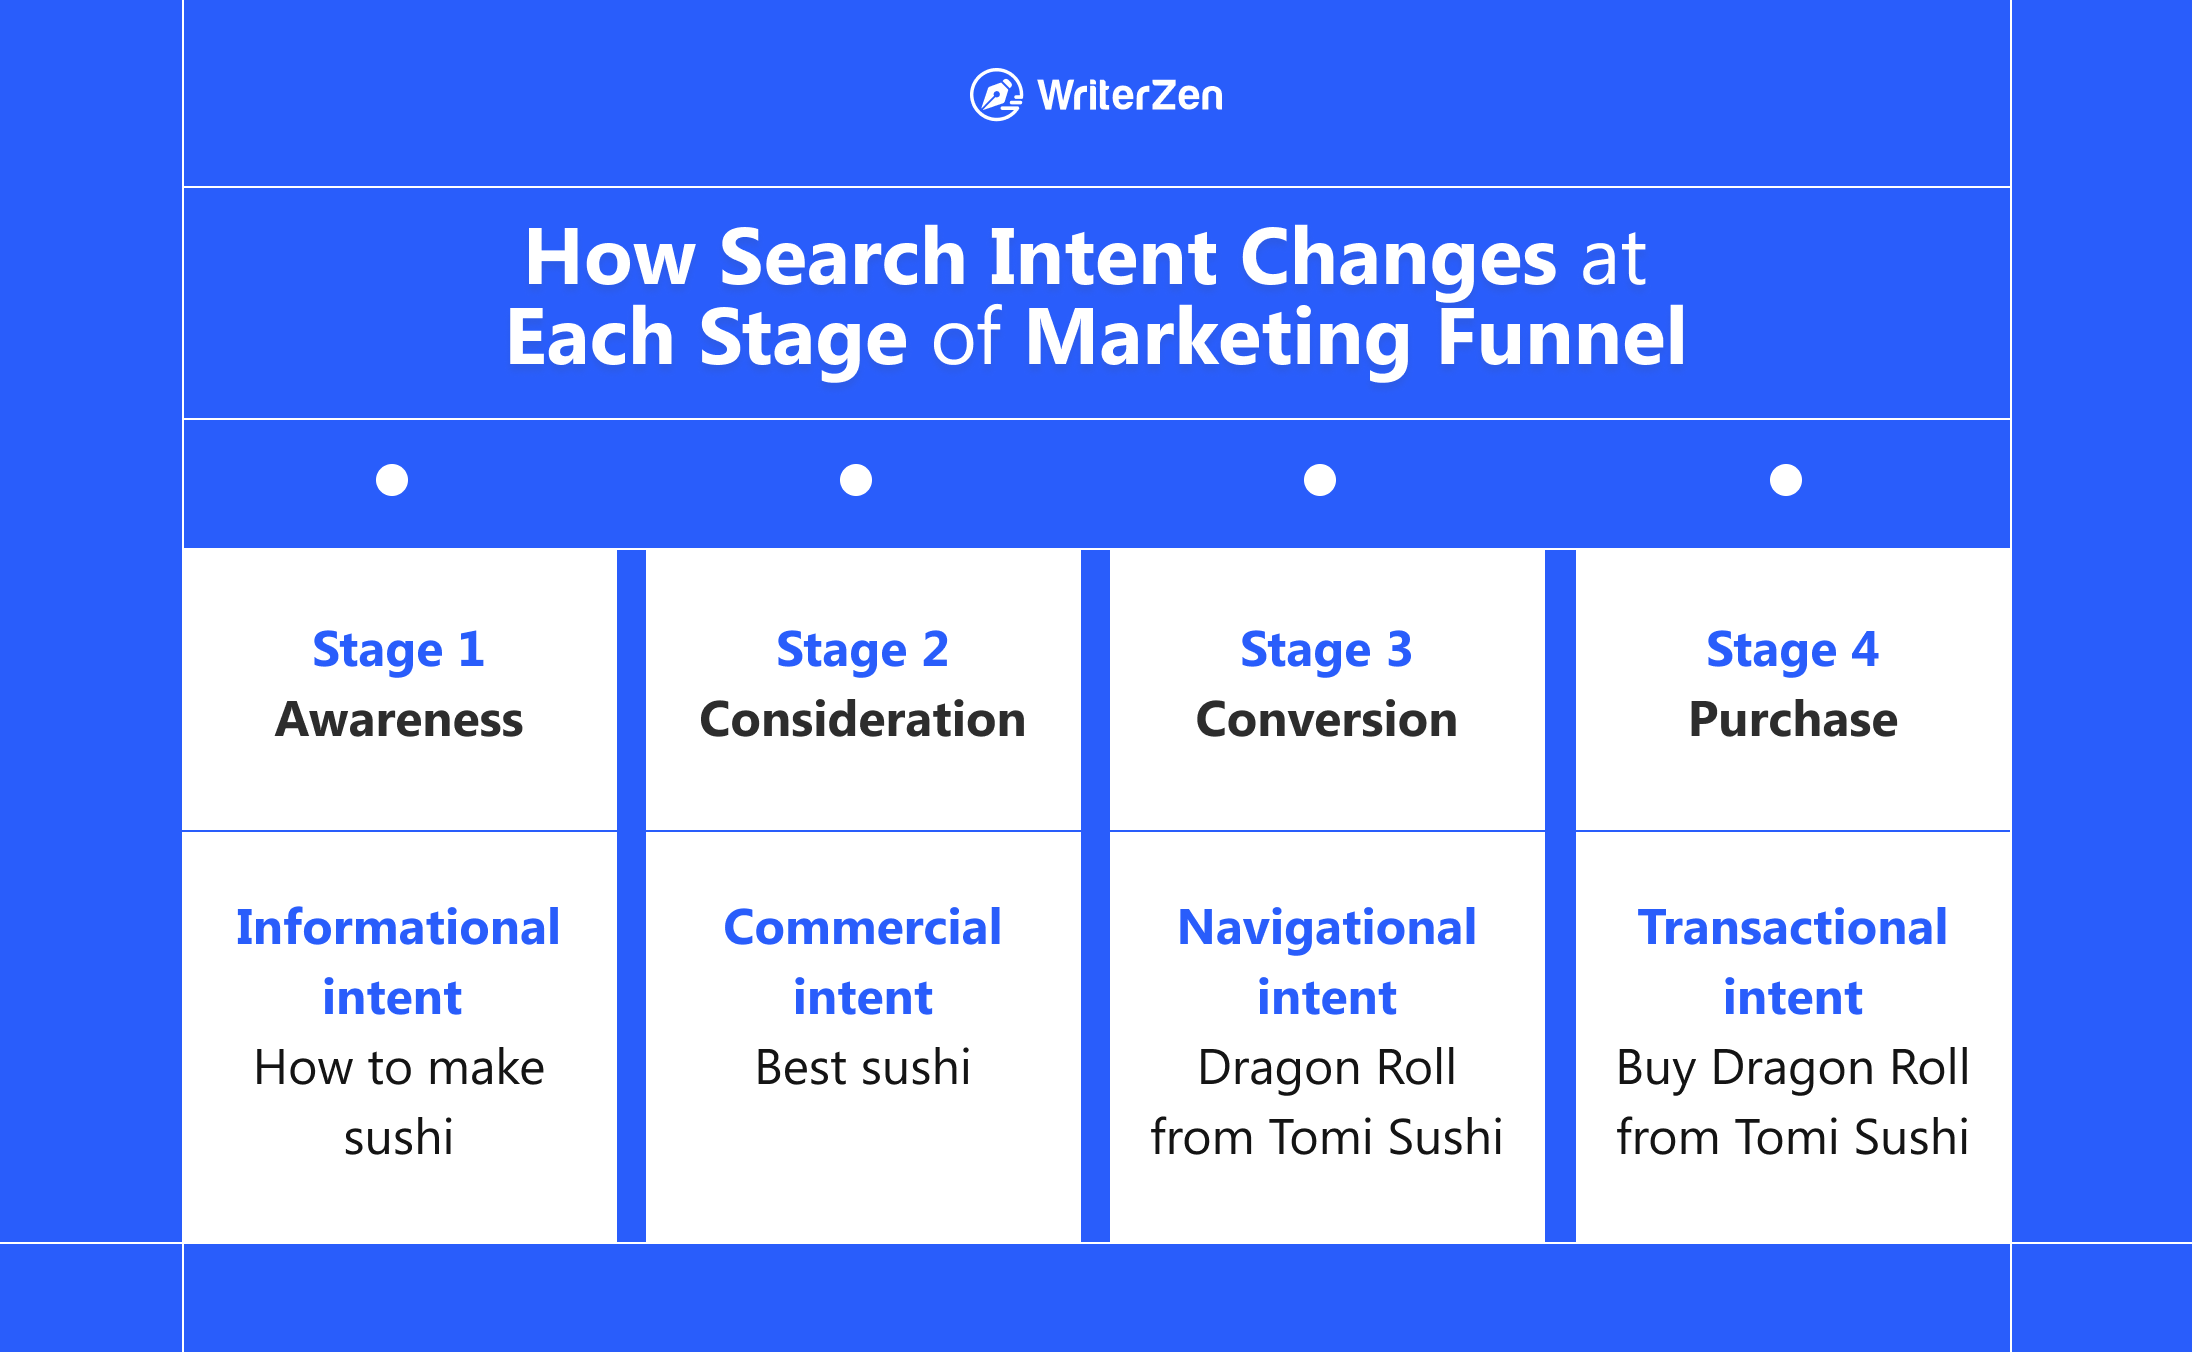 How Search Intent Changes at Each Stage of Marketing Funnel